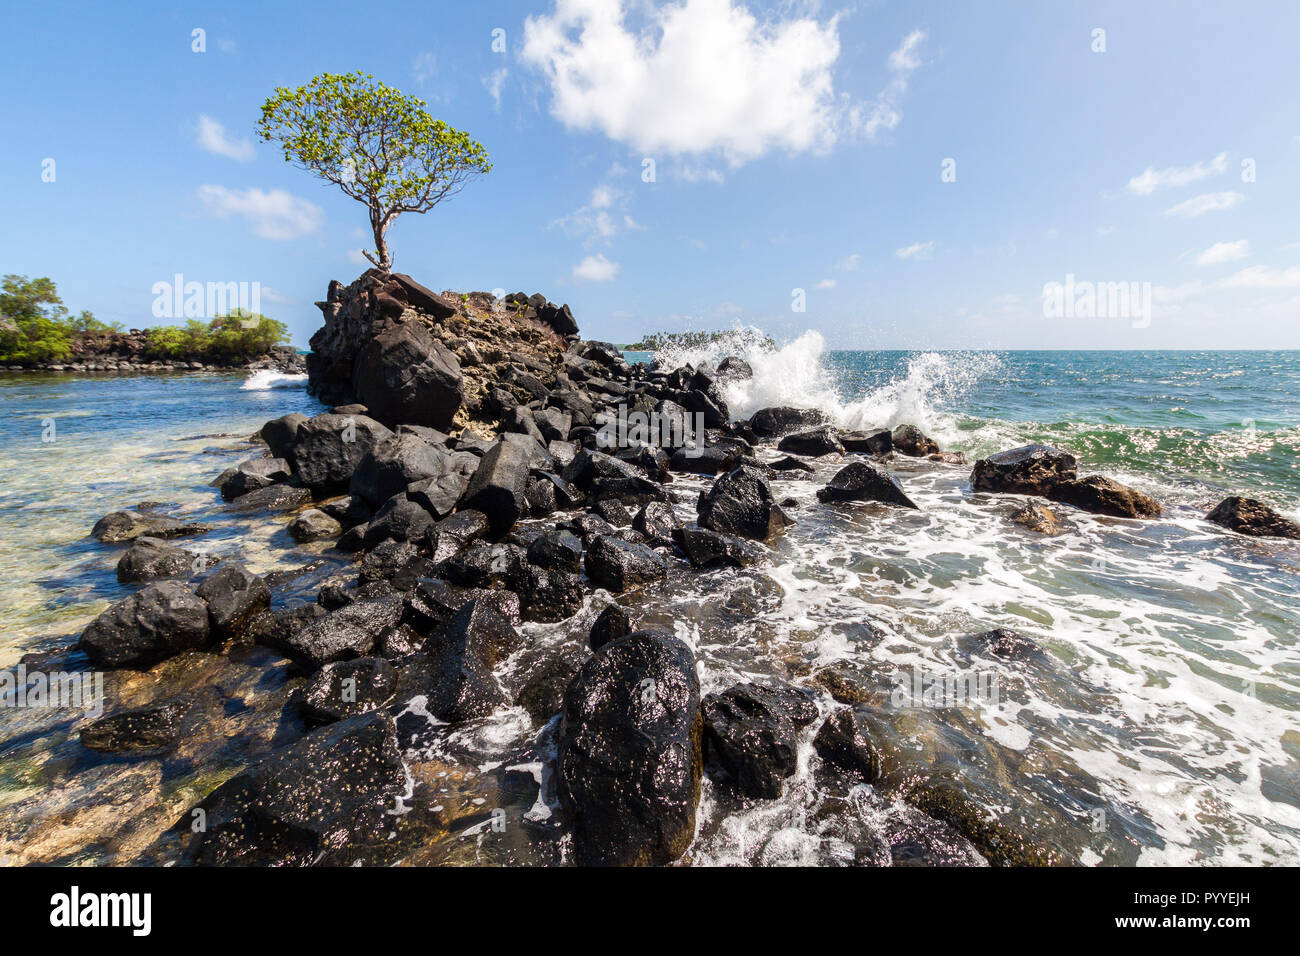 Wave breaks over prehistoric ruined wave breaker made of basalt slabs to shallow lagoon of corals and sand on outskirts of ancient Nan Madol ruined town in Pohnpei, Micronesia, Oceania Stock Photo